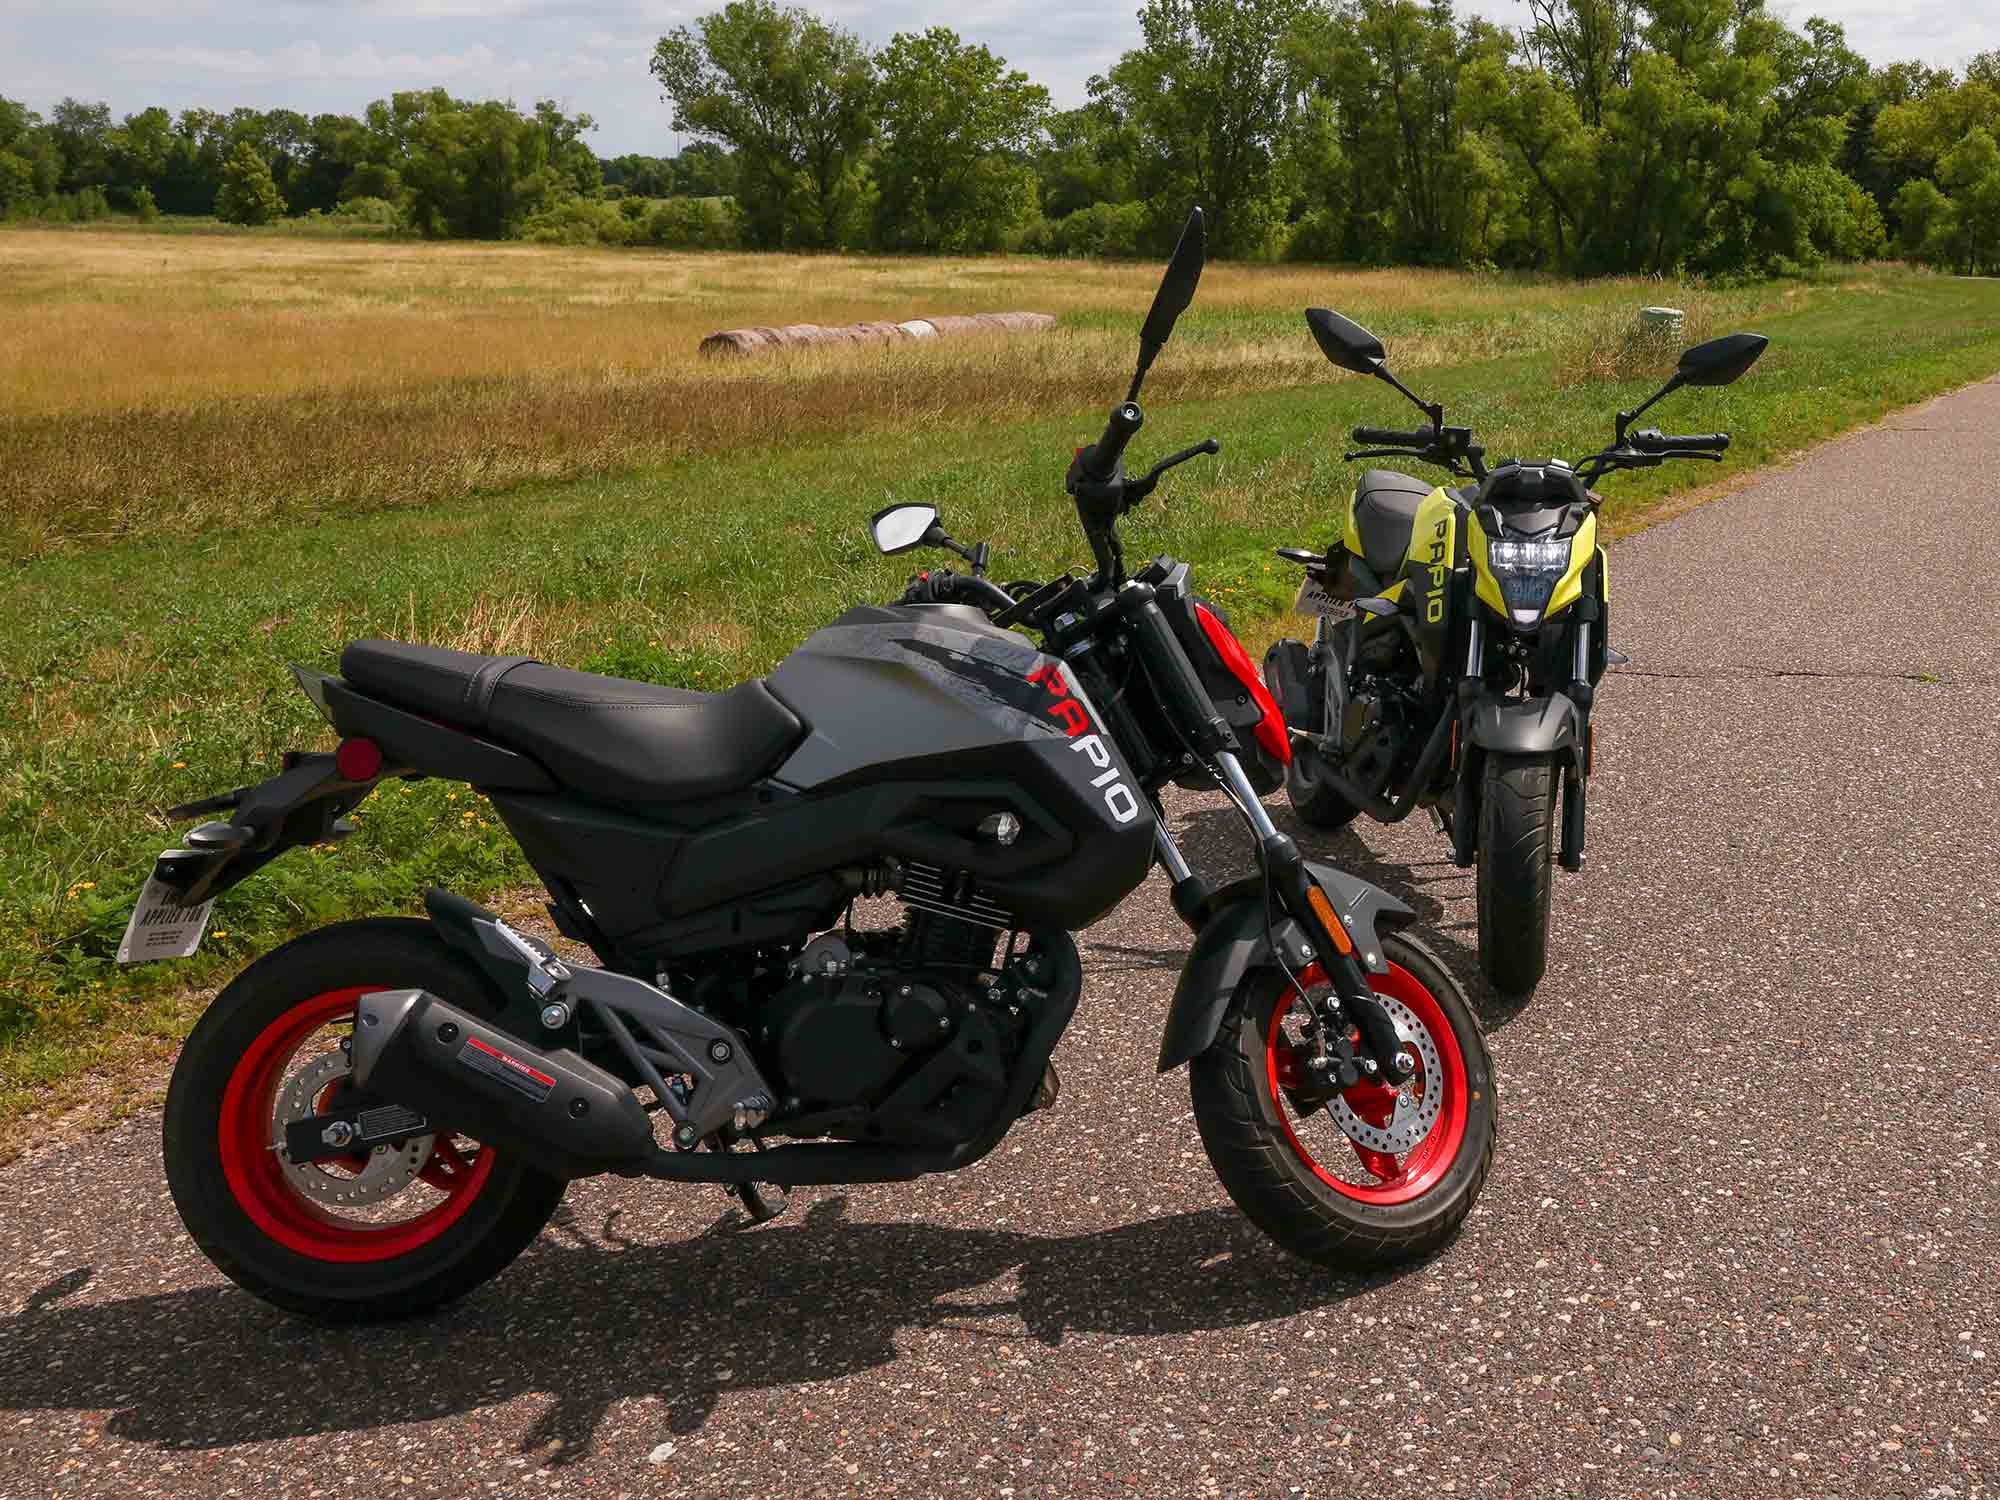 The Papio’s sport-inspired bodywork is available in two colors: yellow and Grey/Red Dragon. MSRP is $2,999, compared to $3,499 for the Honda Grom and $3,399 for the Kawasaki Z125 Pro.